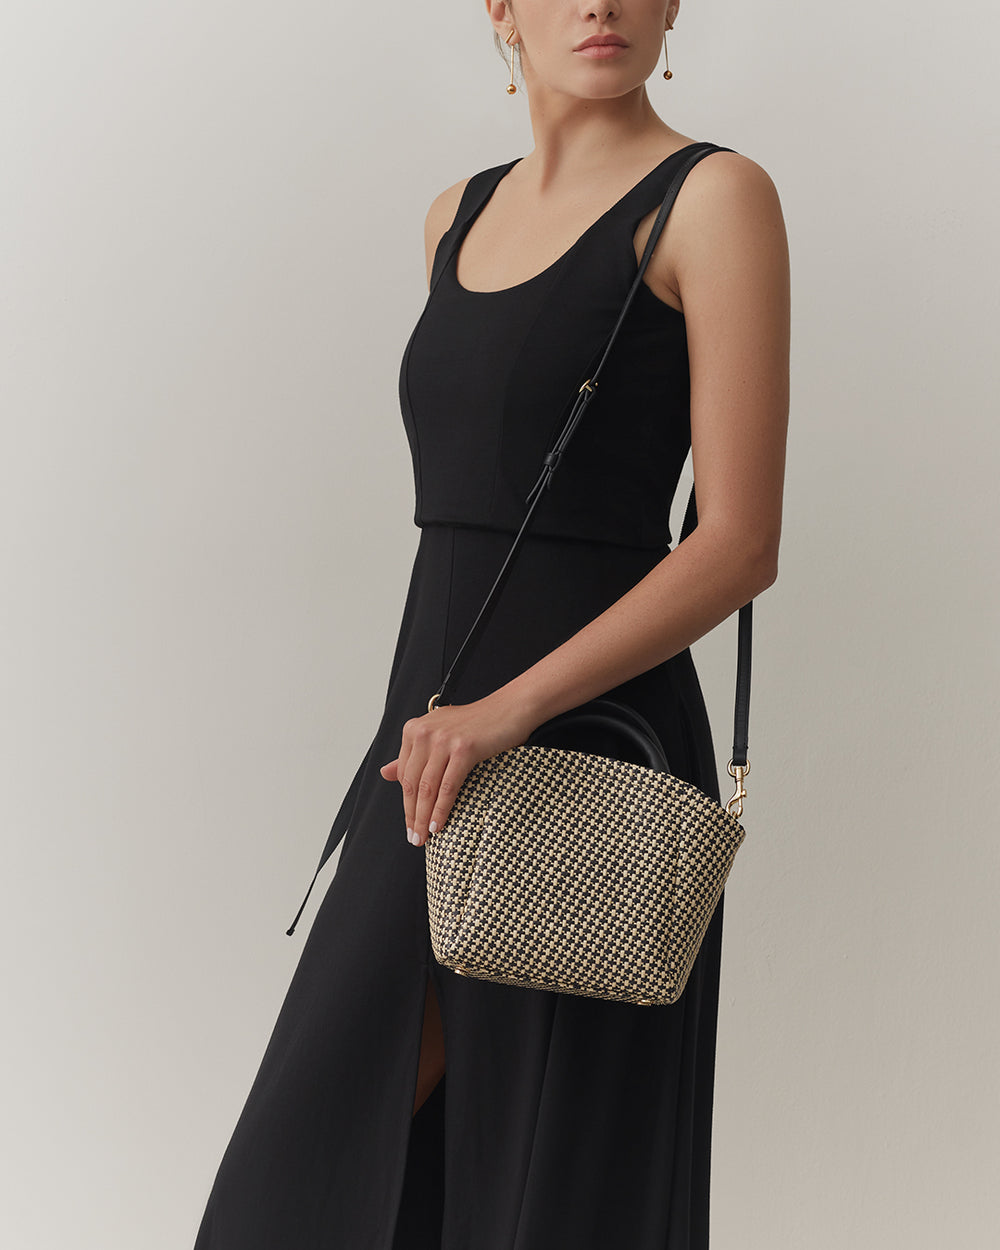 Woman in a sleeveless top holding a shoulder bag.